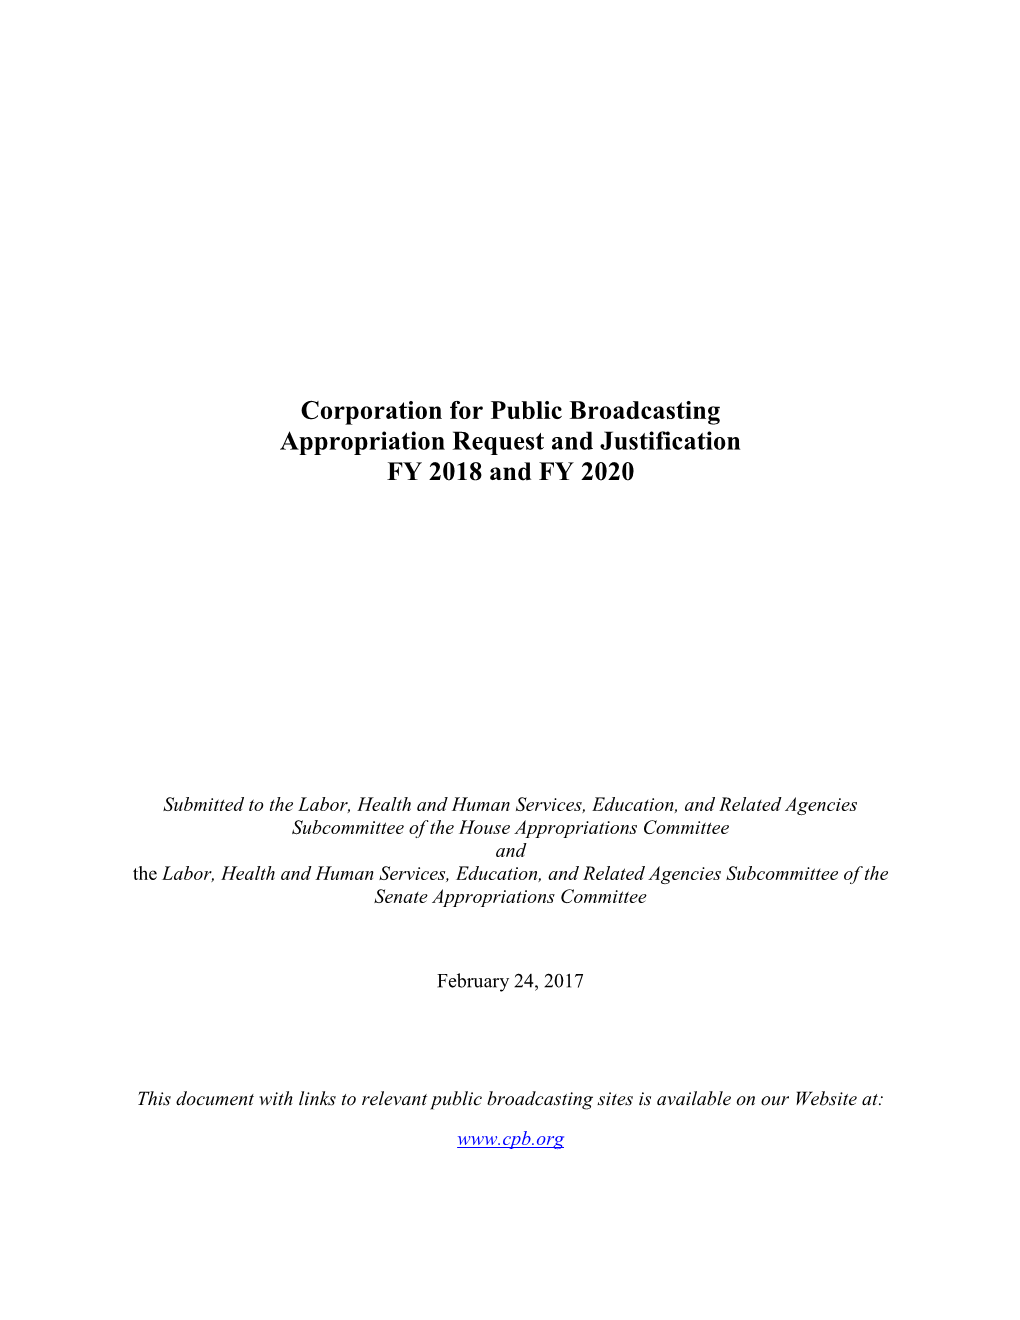 Corporation for Public Broadcasting Appropriation Request and Justification FY 2018 and FY 2020